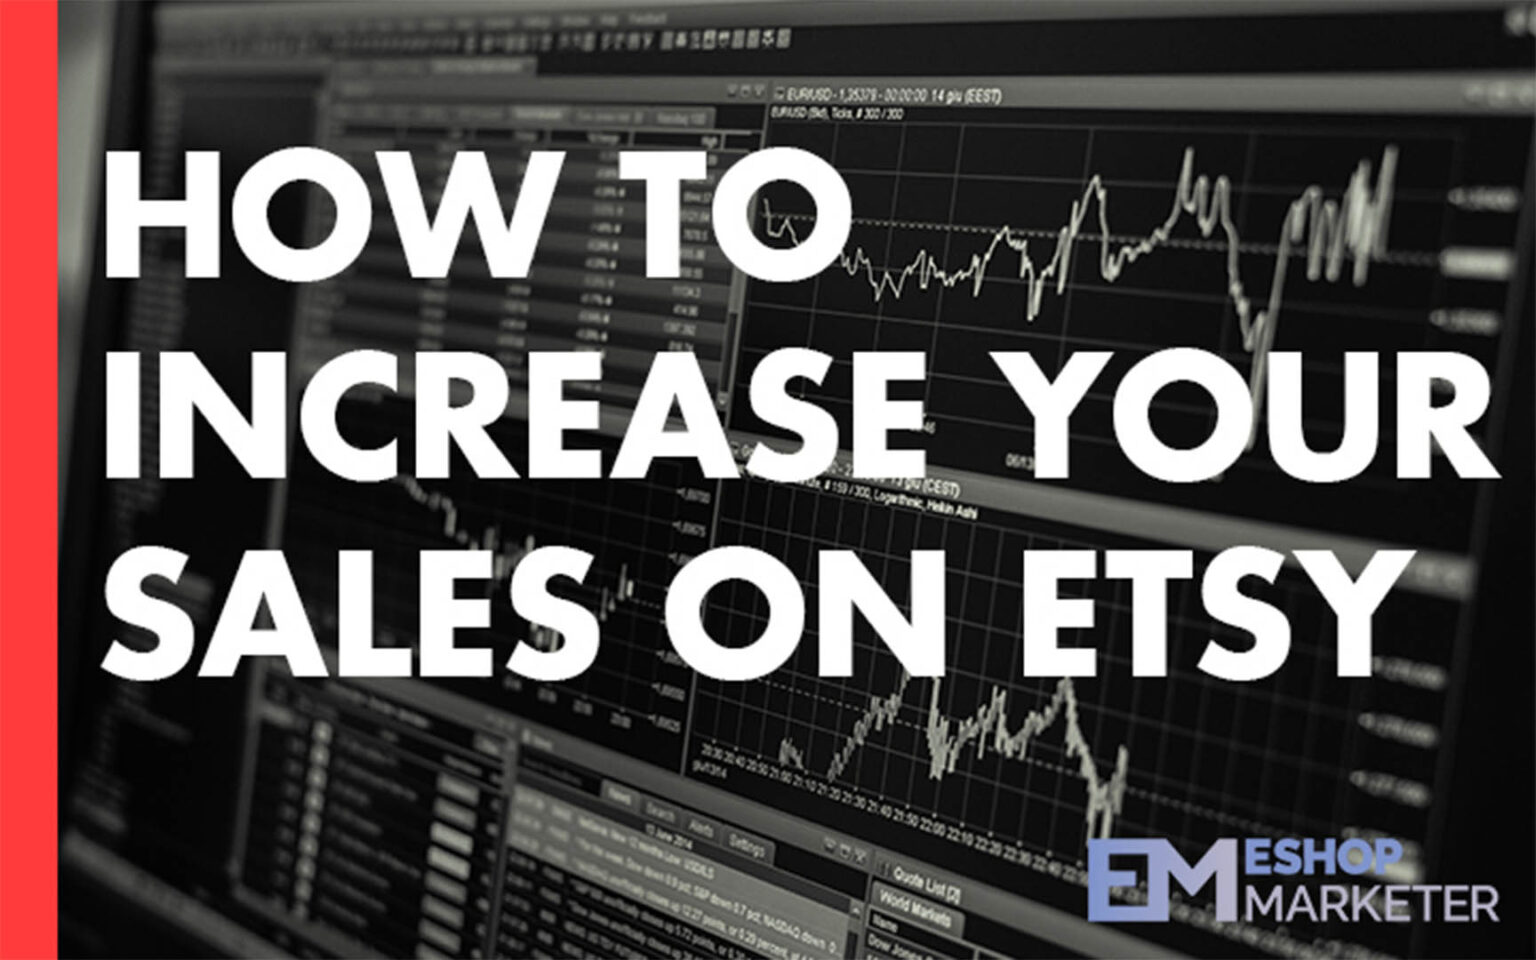 How to Increase Your Sales on Etsy Marketer